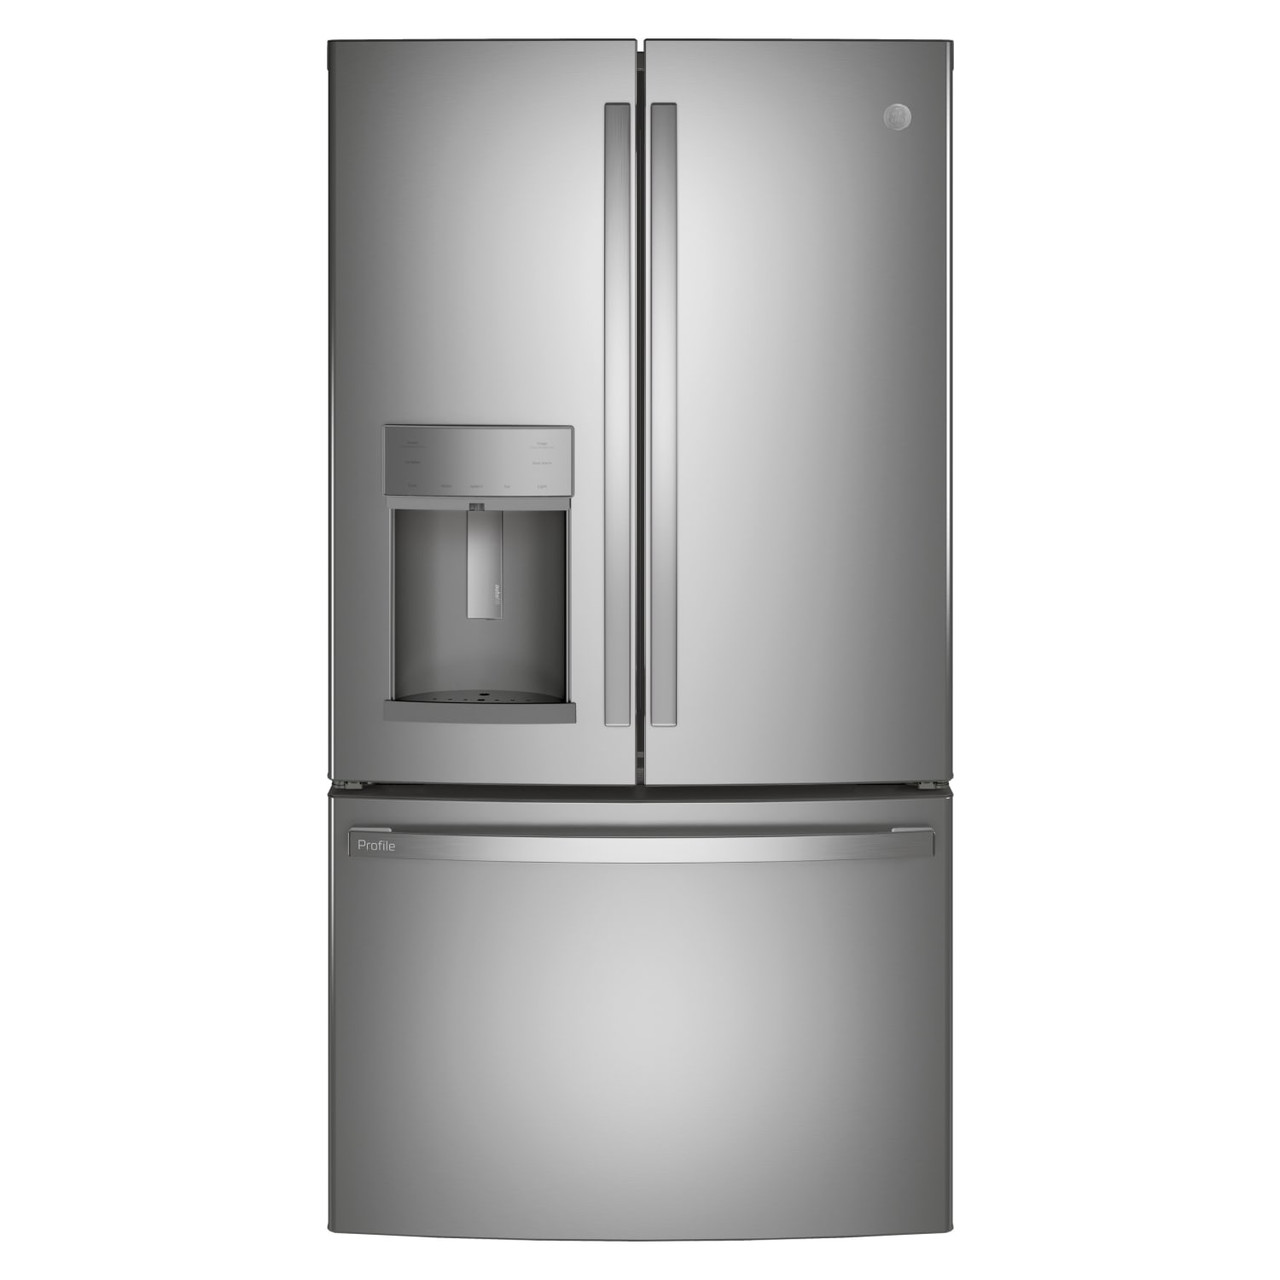 GE Profile™ Series ENERGY STAR® 22.1 Cu. Ft. Counter-Depth Fingerprint Resistant French-Door Refrigerator with Hands-Free AutoFill - PYE22KYNFS